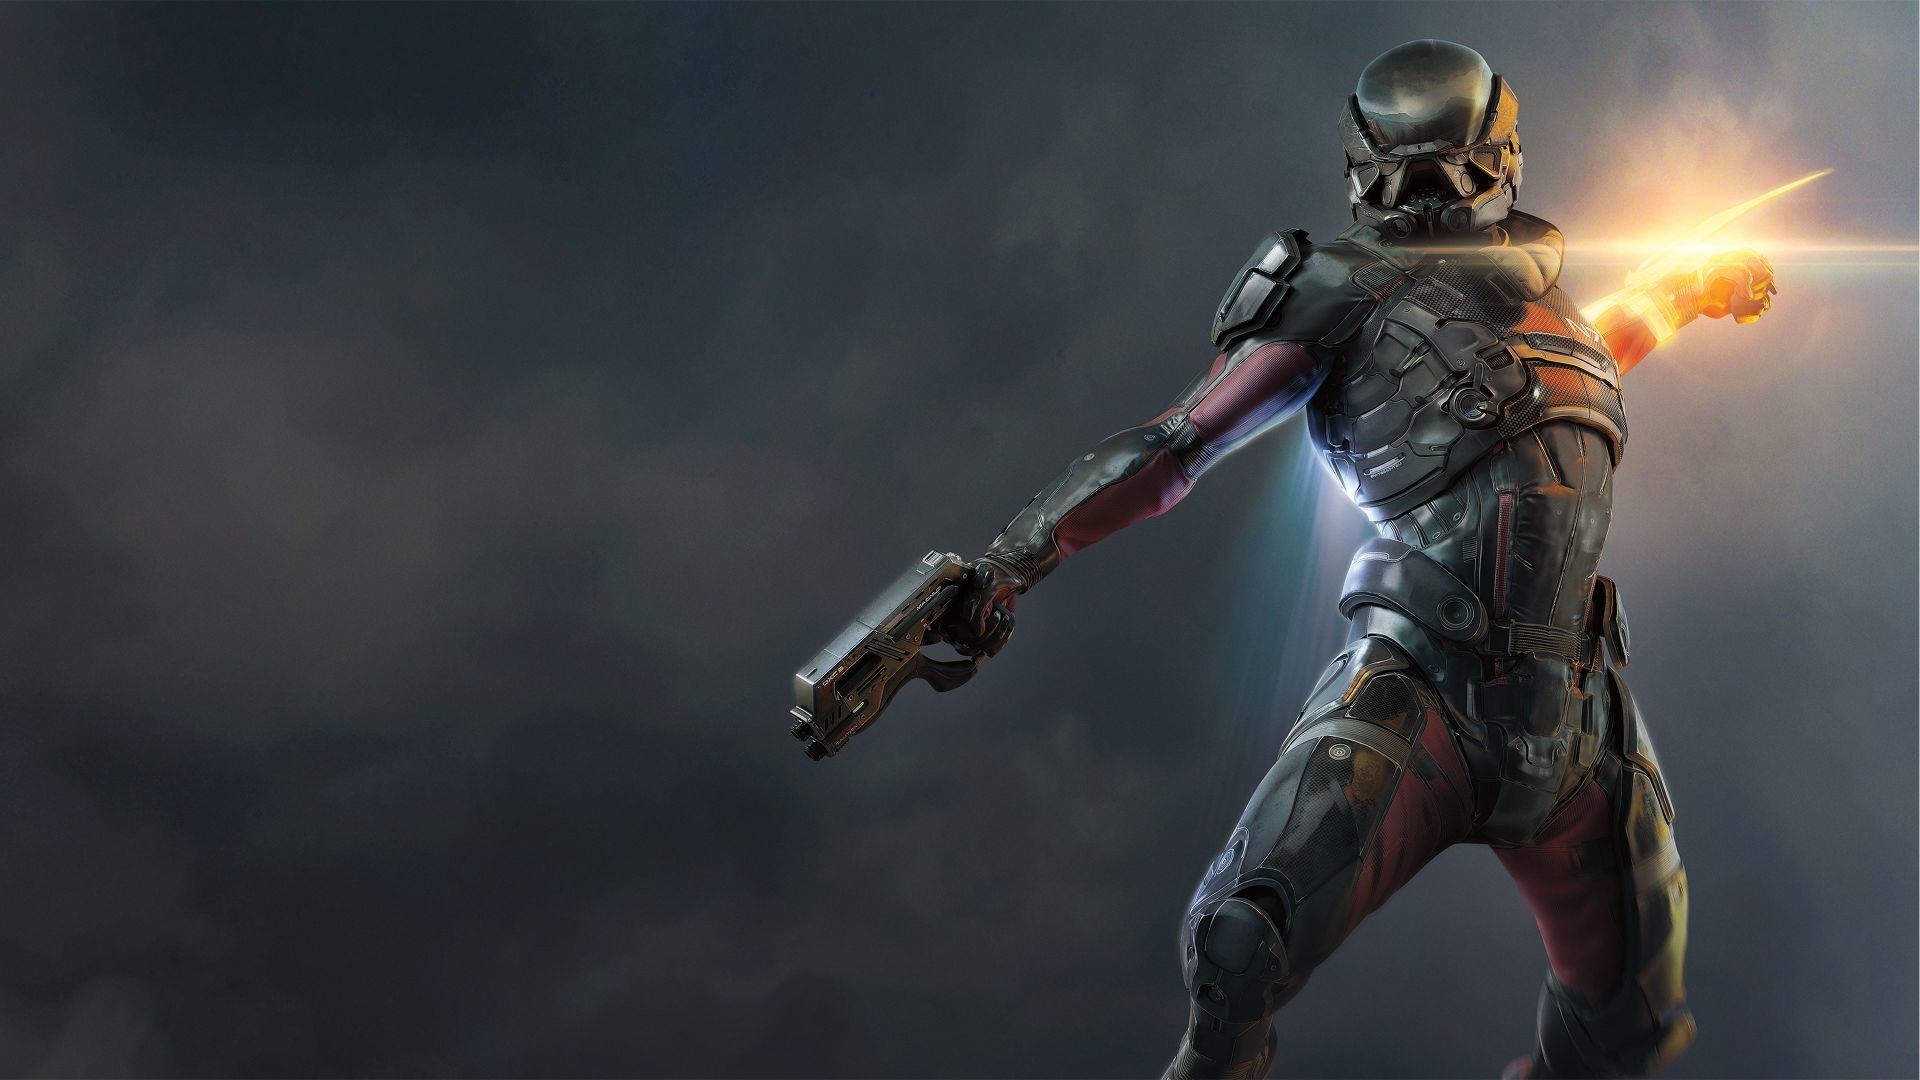 Download full hd 1920x1080 Mass Effect: Andromeda PC background ID:64483 for free